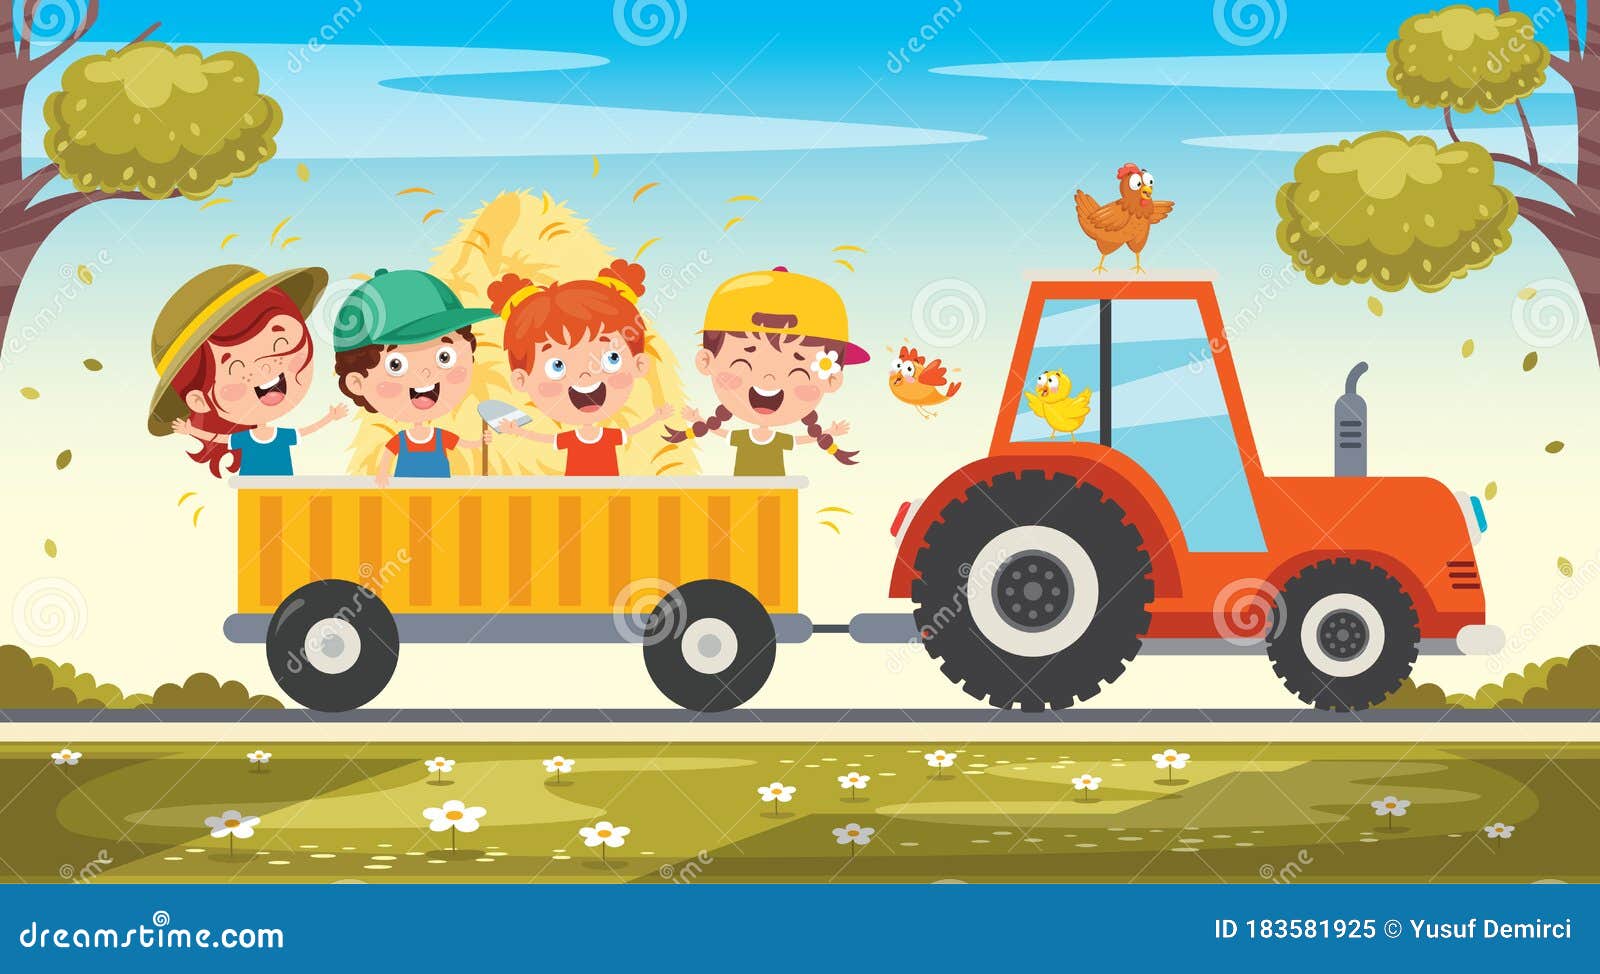 Cartoon Tractor Trolley Stock Illustrations – 66 Cartoon Tractor Trolley  Stock Illustrations, Vectors & Clipart - Dreamstime